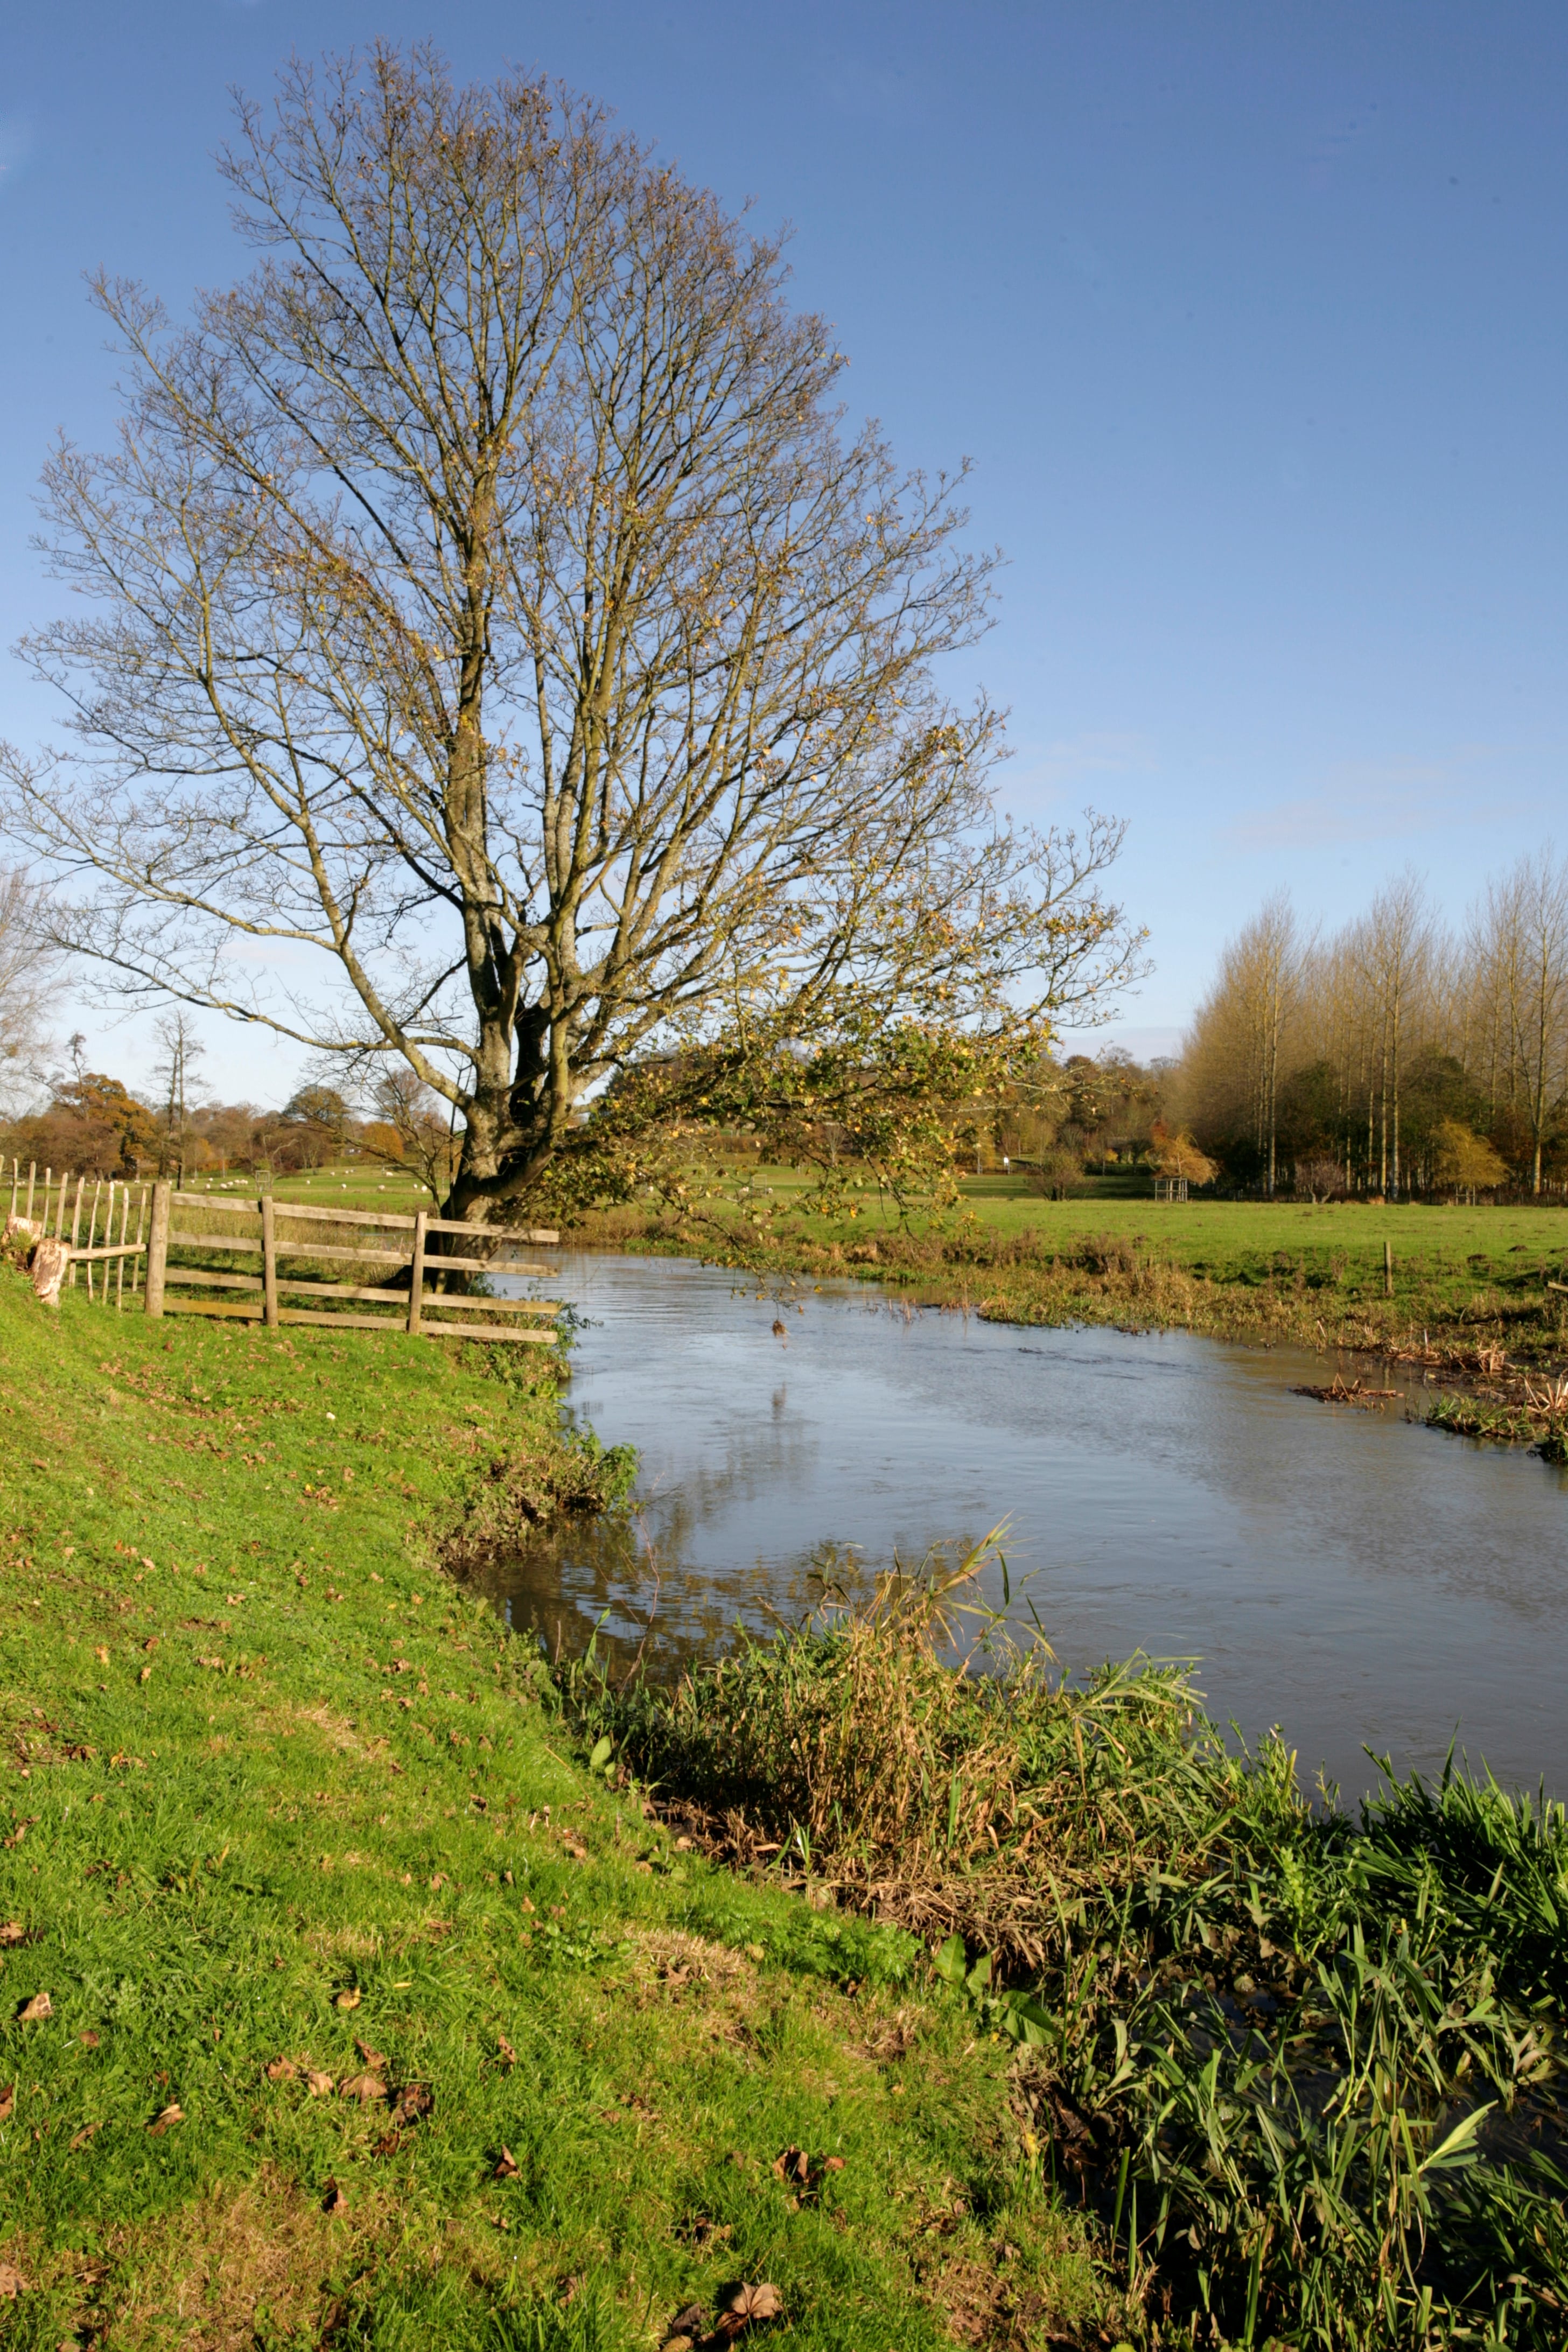 Stream at Godmersham Park, on a sunny day. Grass banks each side, and trees in the distance.